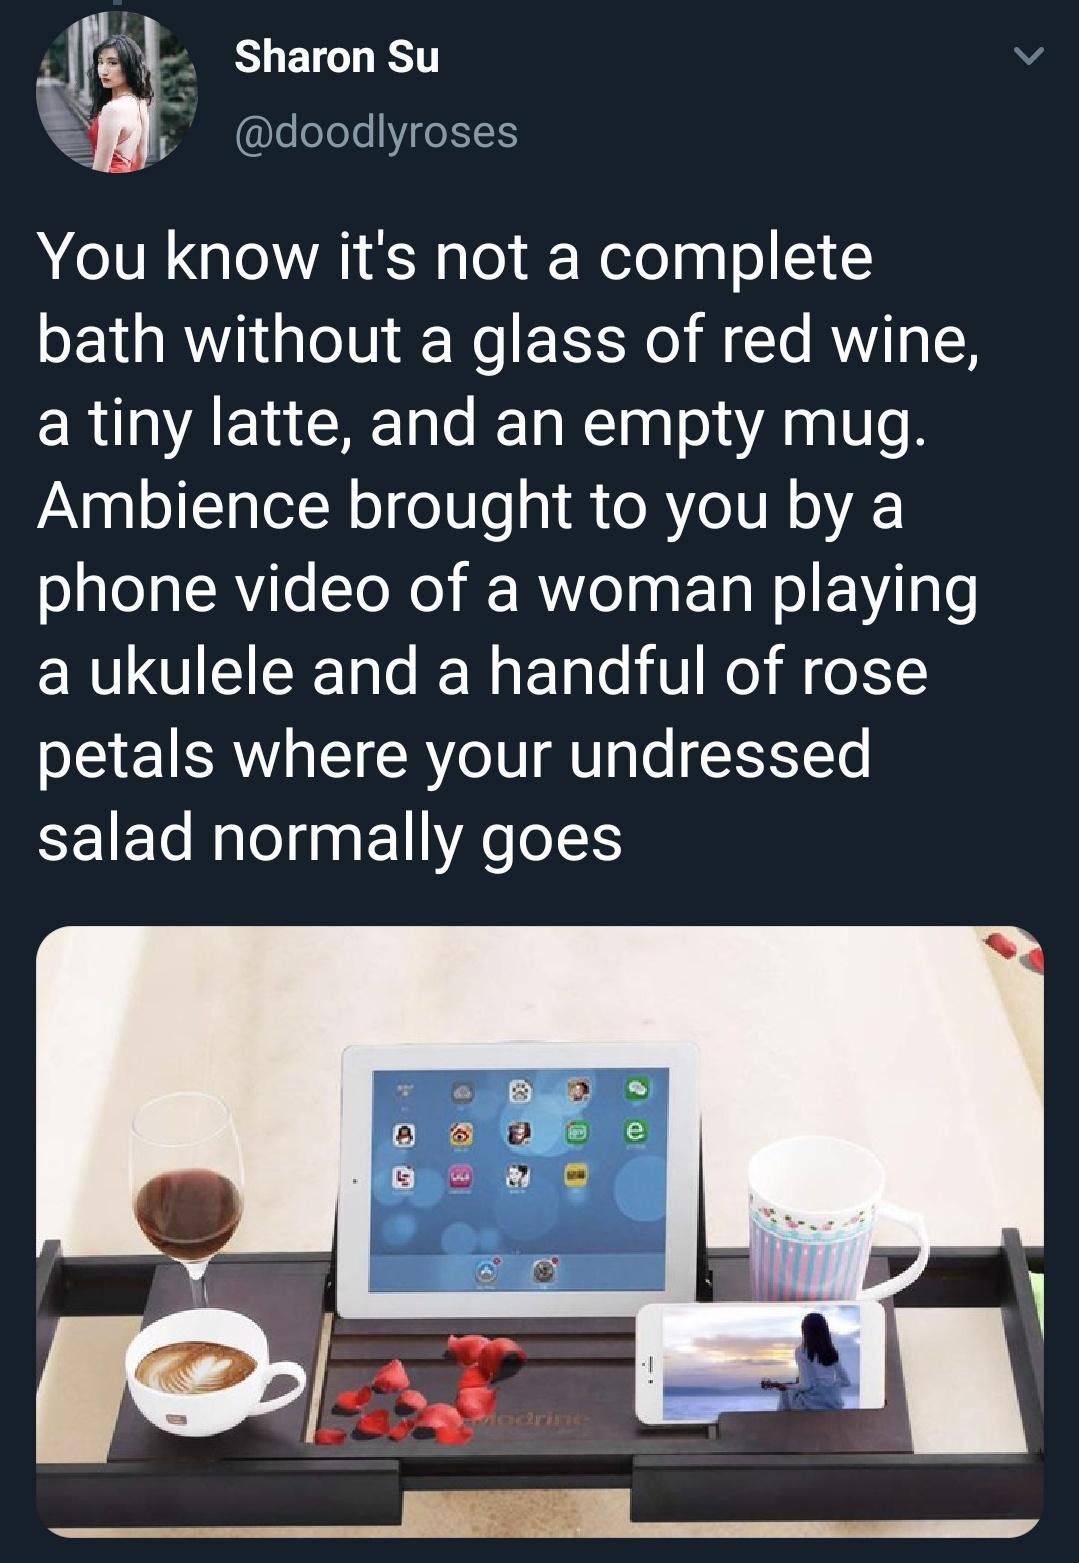 funny tweets and replies on twitter - multimedia - Sharon Su You know it's not a complete bath without a glass of red wine, a tiny latte, and an empty mug. Ambience brought to you by a phone video of a woman playing a ukulele and a handful of rose petals 